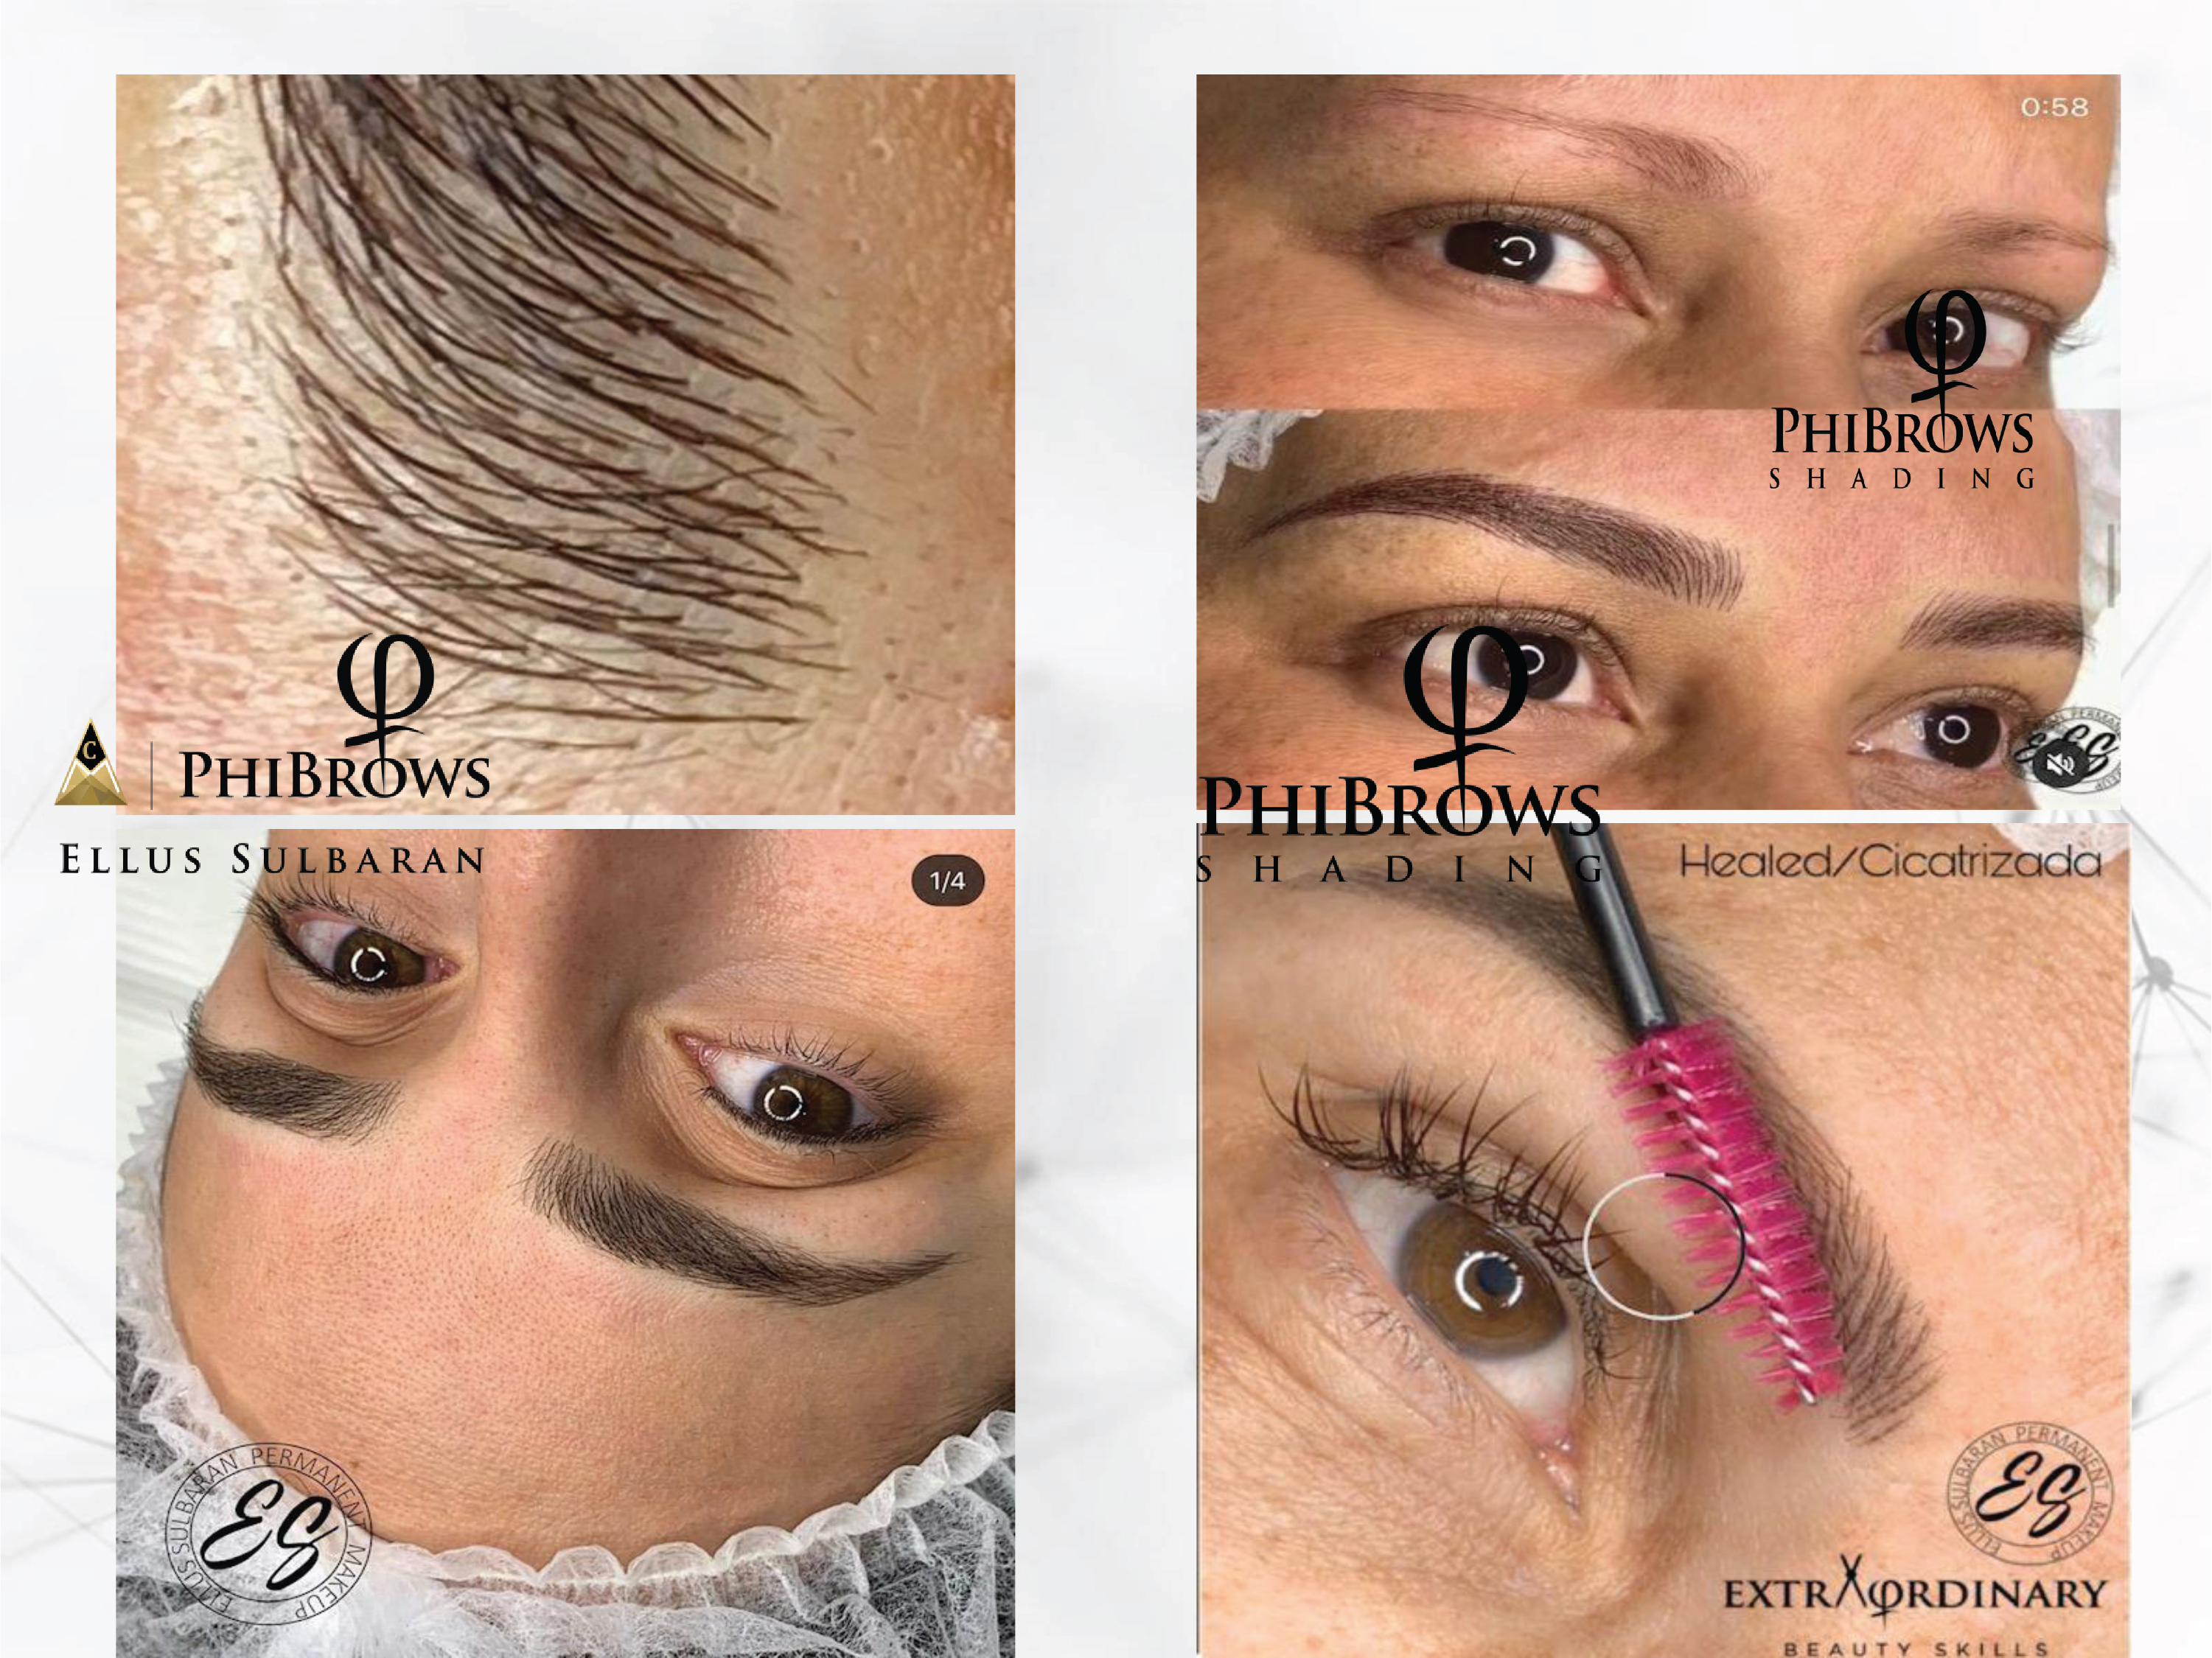 Phibrows Shading Online